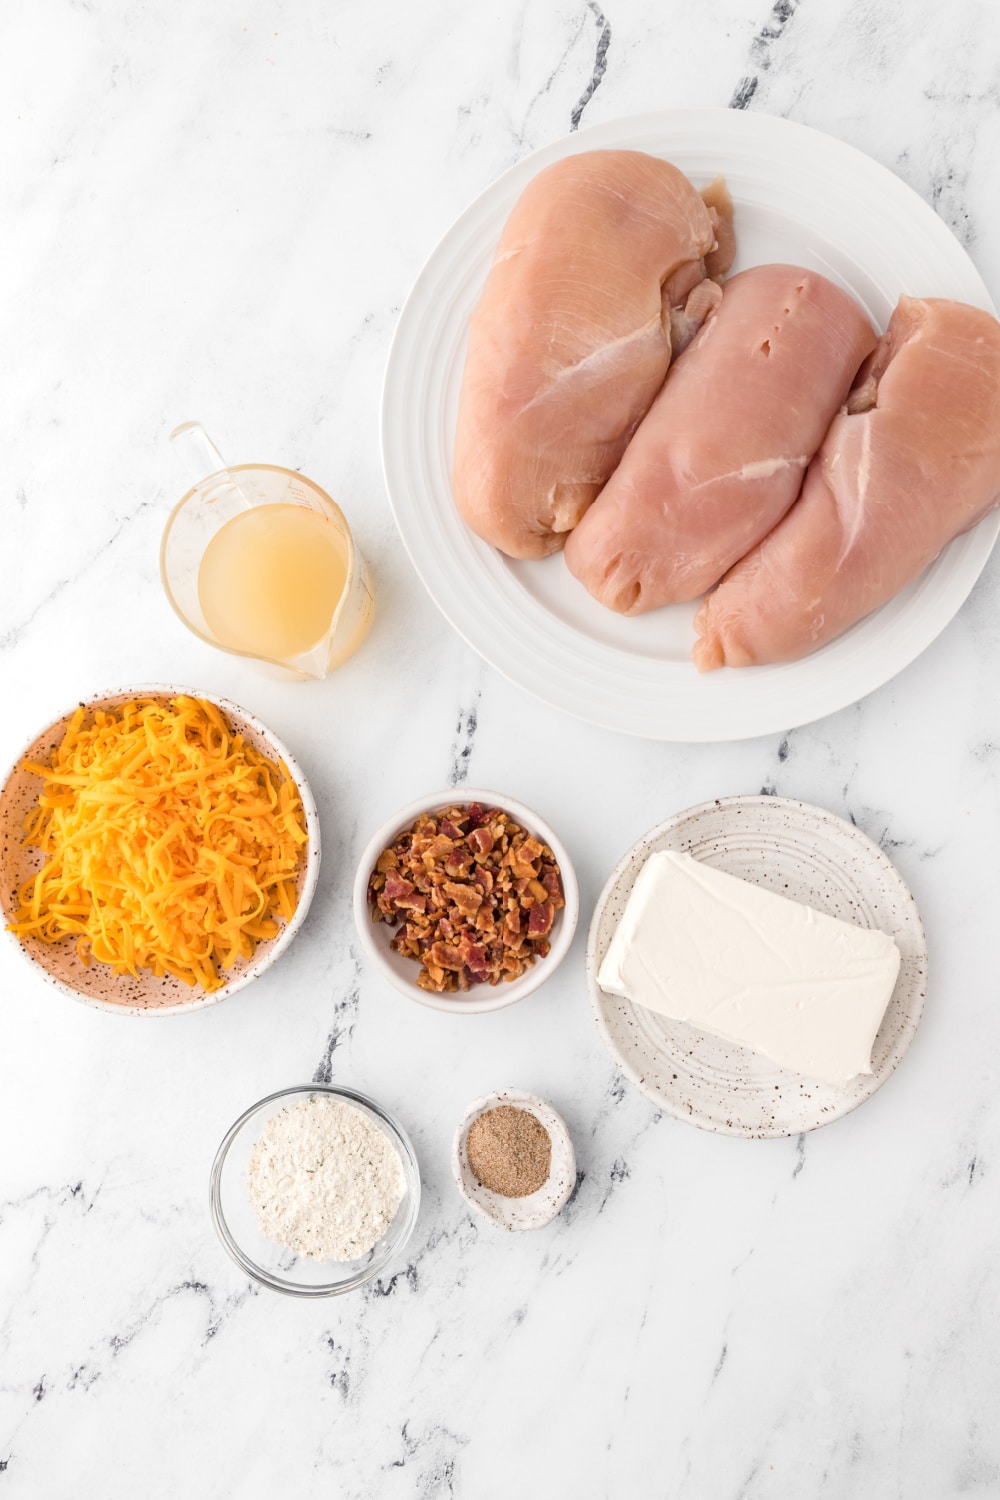 Measured ingredients needed to make the chicken, bacon, ranch, cheese mixture presented on a white marble countertop.